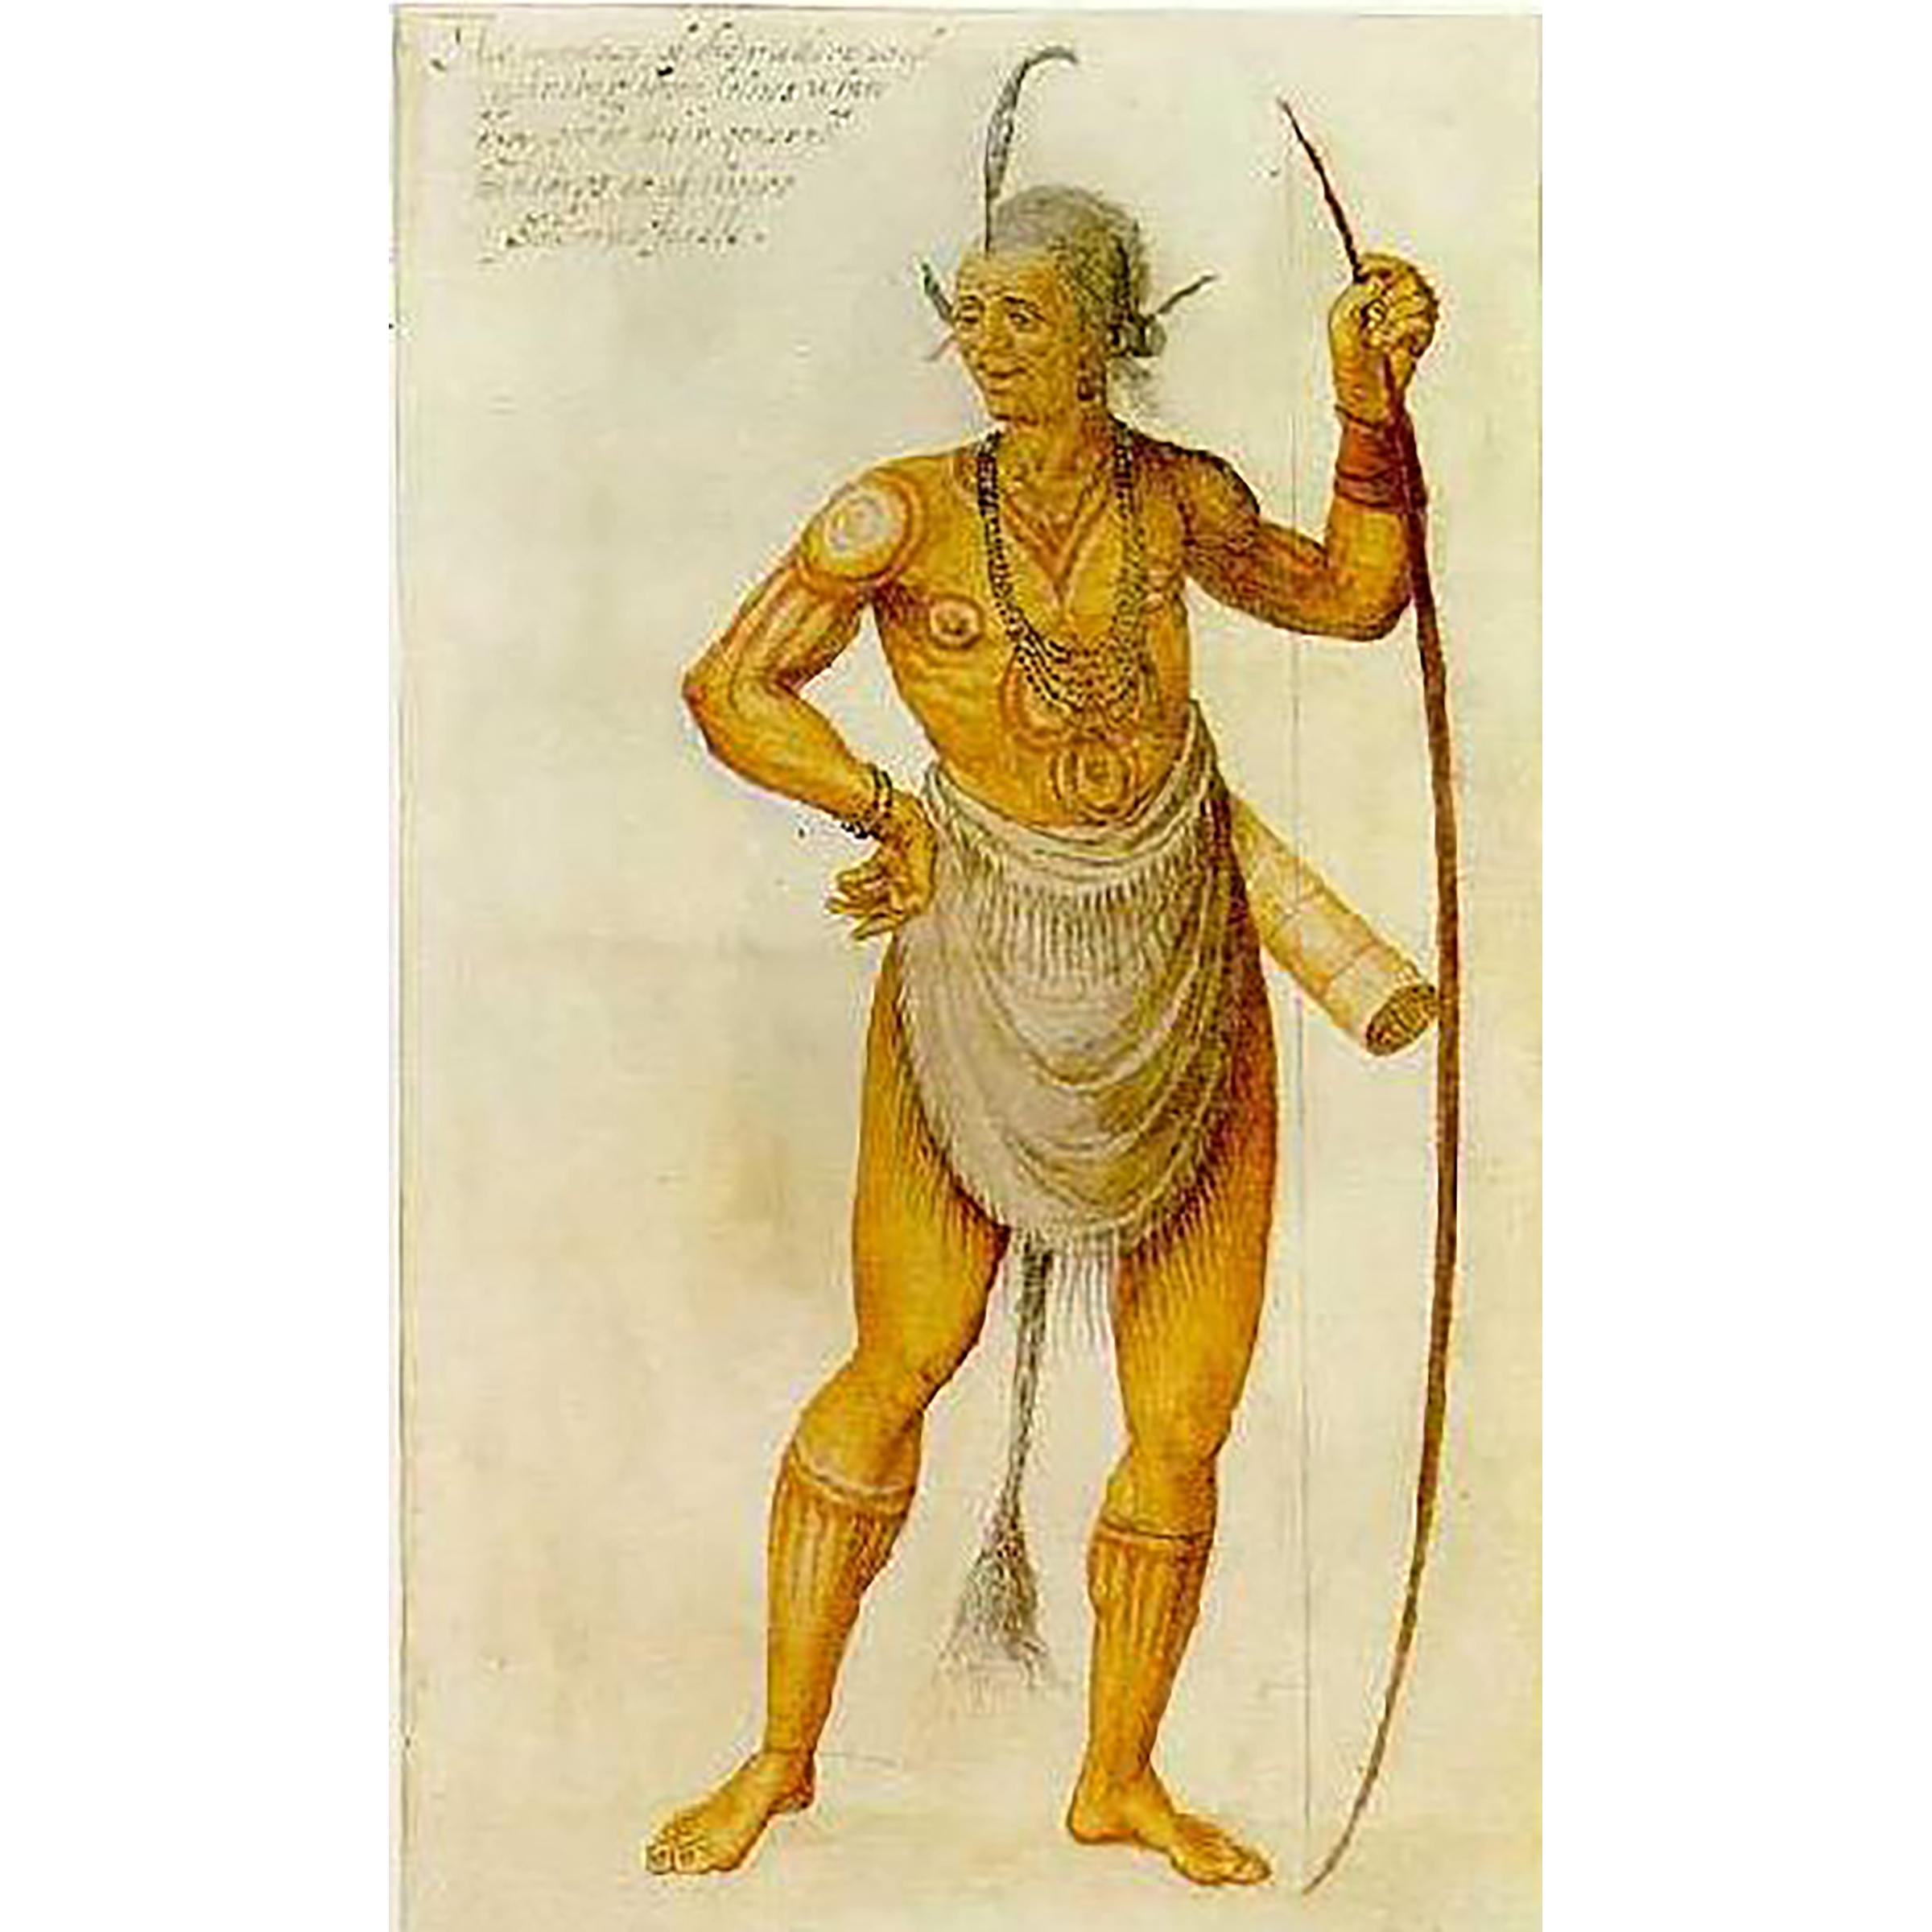 A 16th century painting of a Chesapeake Bay warrior by John White; this painting was adapted to represent Opechancanough in John Smith's "General History of Virginia" (1624). (Public Domain)